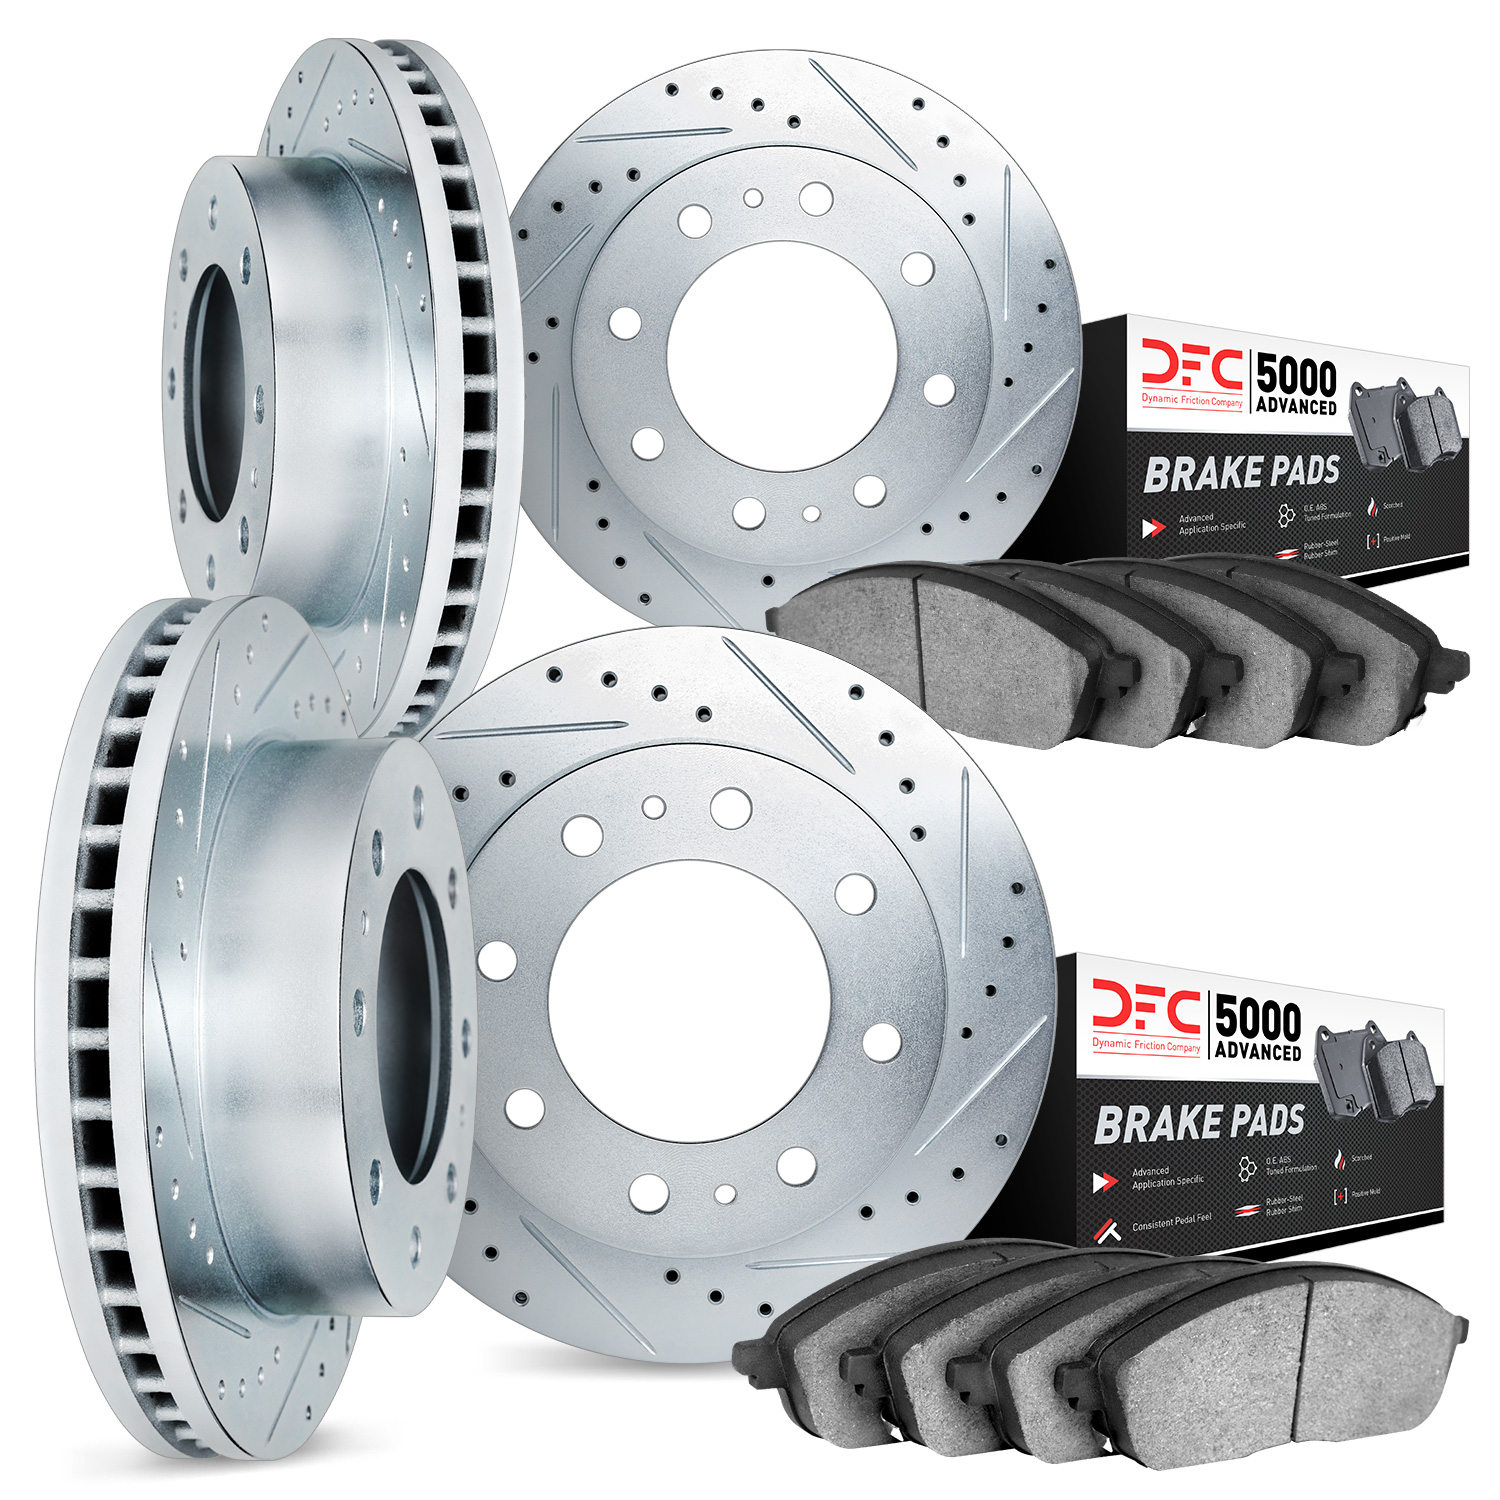 7504-48029 Drilled/Slotted Brake Rotors w/5000 Advanced Brake Pads Kit [Silver], 2018-2020 GM, Position: Front and Rear